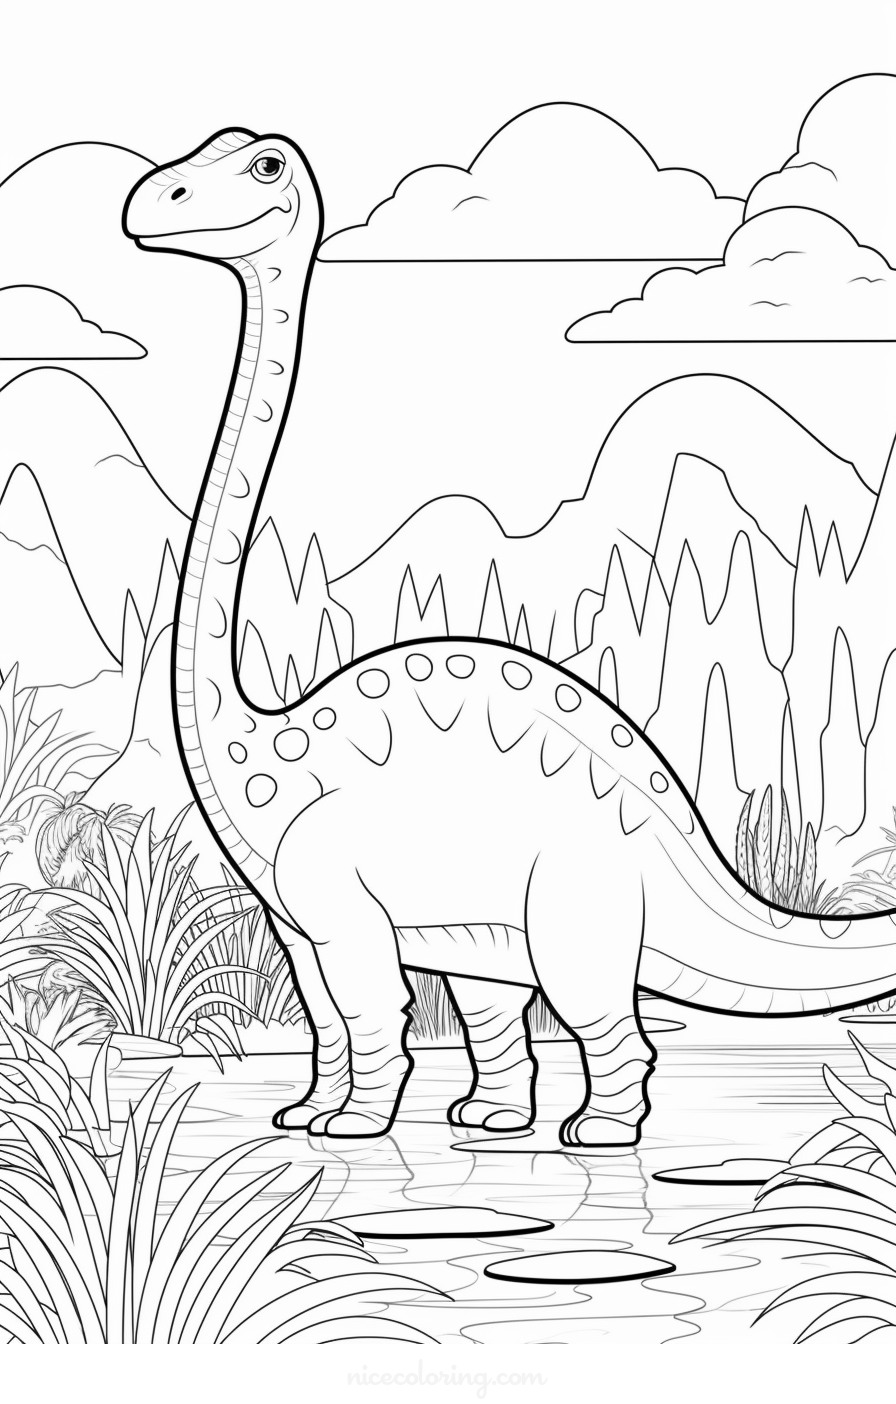 A friendly Triceratops in a prehistoric landscape coloring